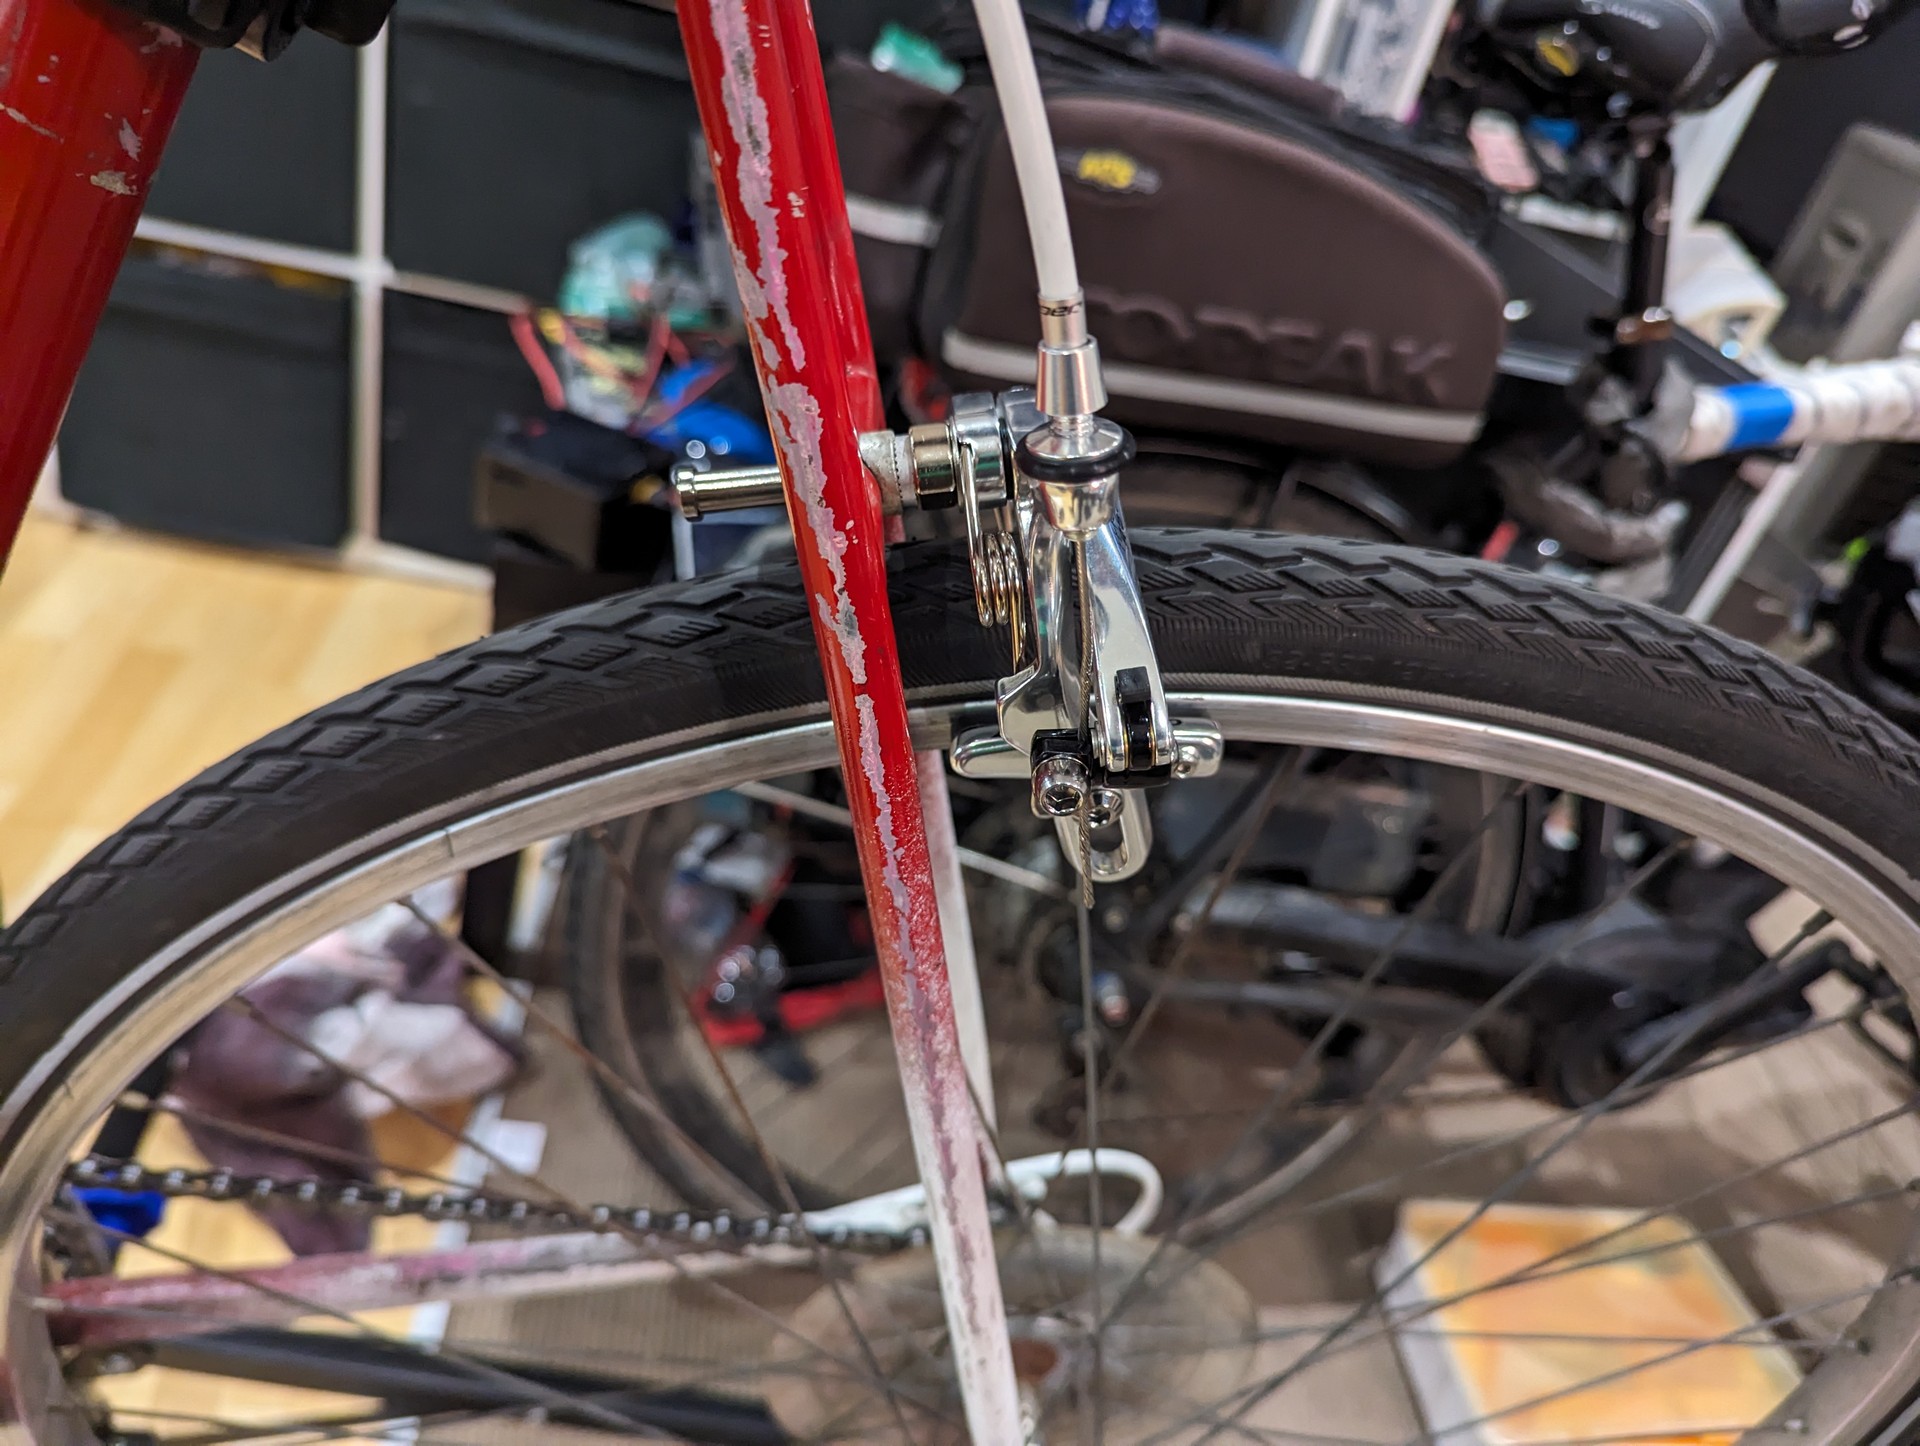 Rear of the bike showing that the front brake has been installed on the rear